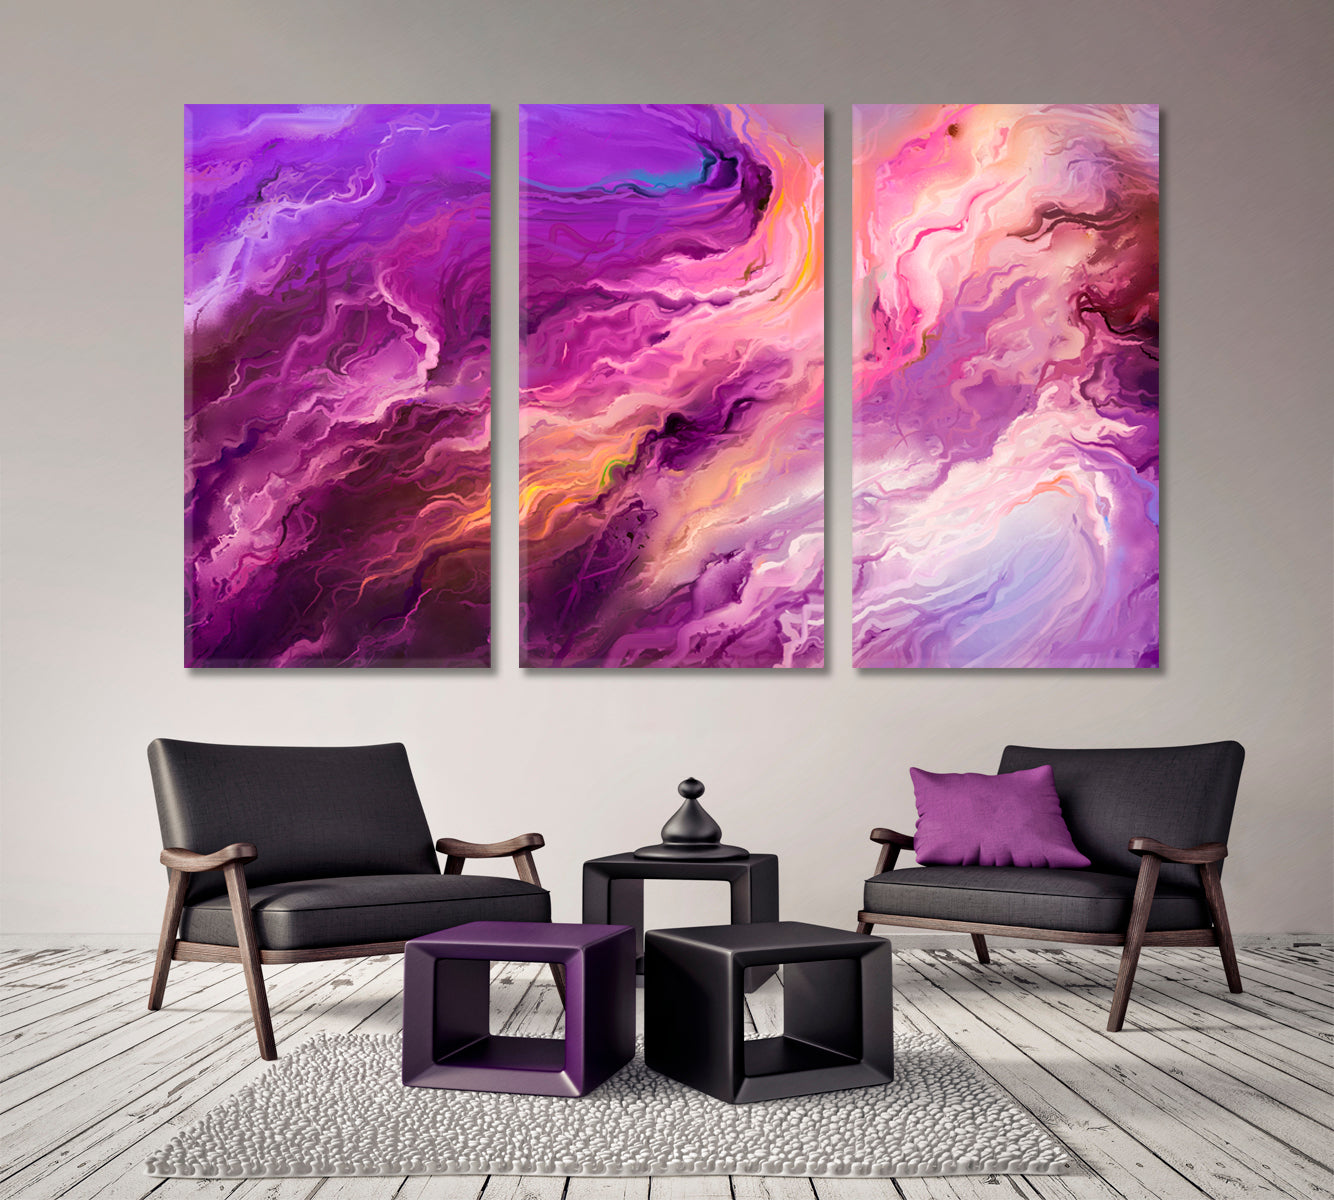 Abstract Contemporary Floating Swirls Abstract Art Print Artesty 3 panels 36" x 24" 